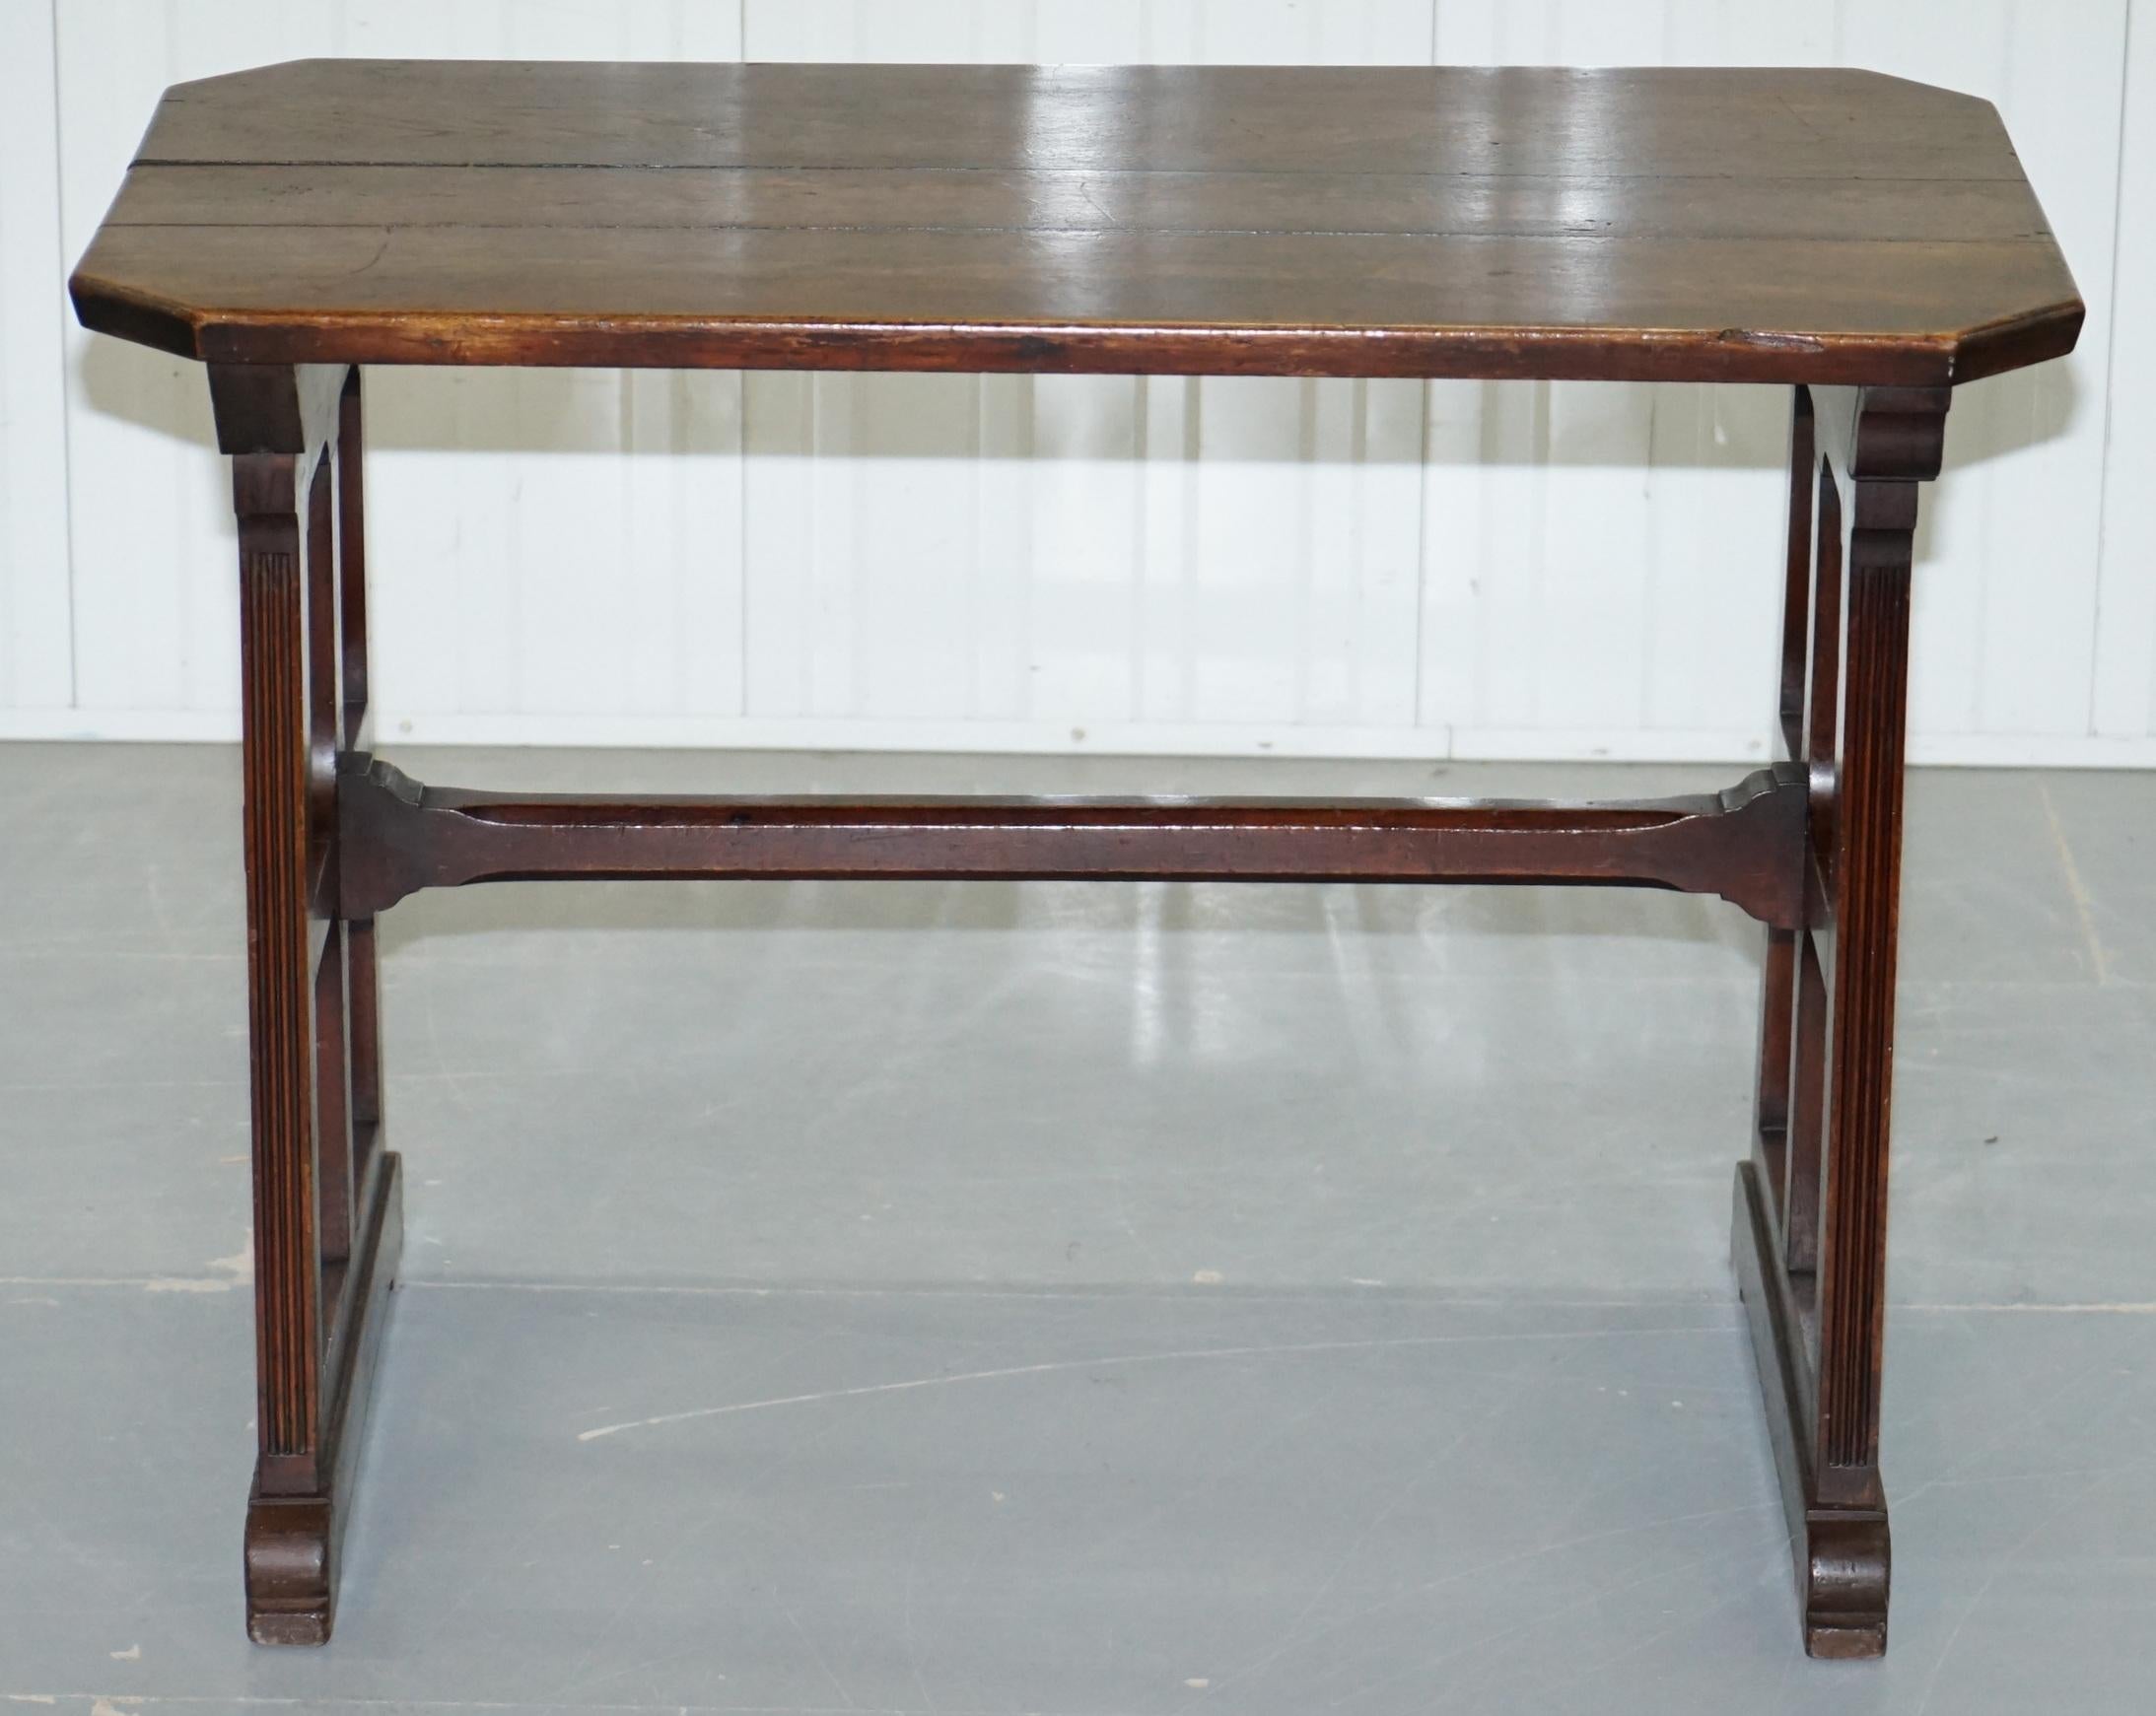 We are delighted to offer for sale this rare Gothic Revival A.W.N Pugin style Vestry writing table, circa 1780.

A very good looking and rare little table, well over 200 years old with original timber all over. The table is in the manor of Pugin